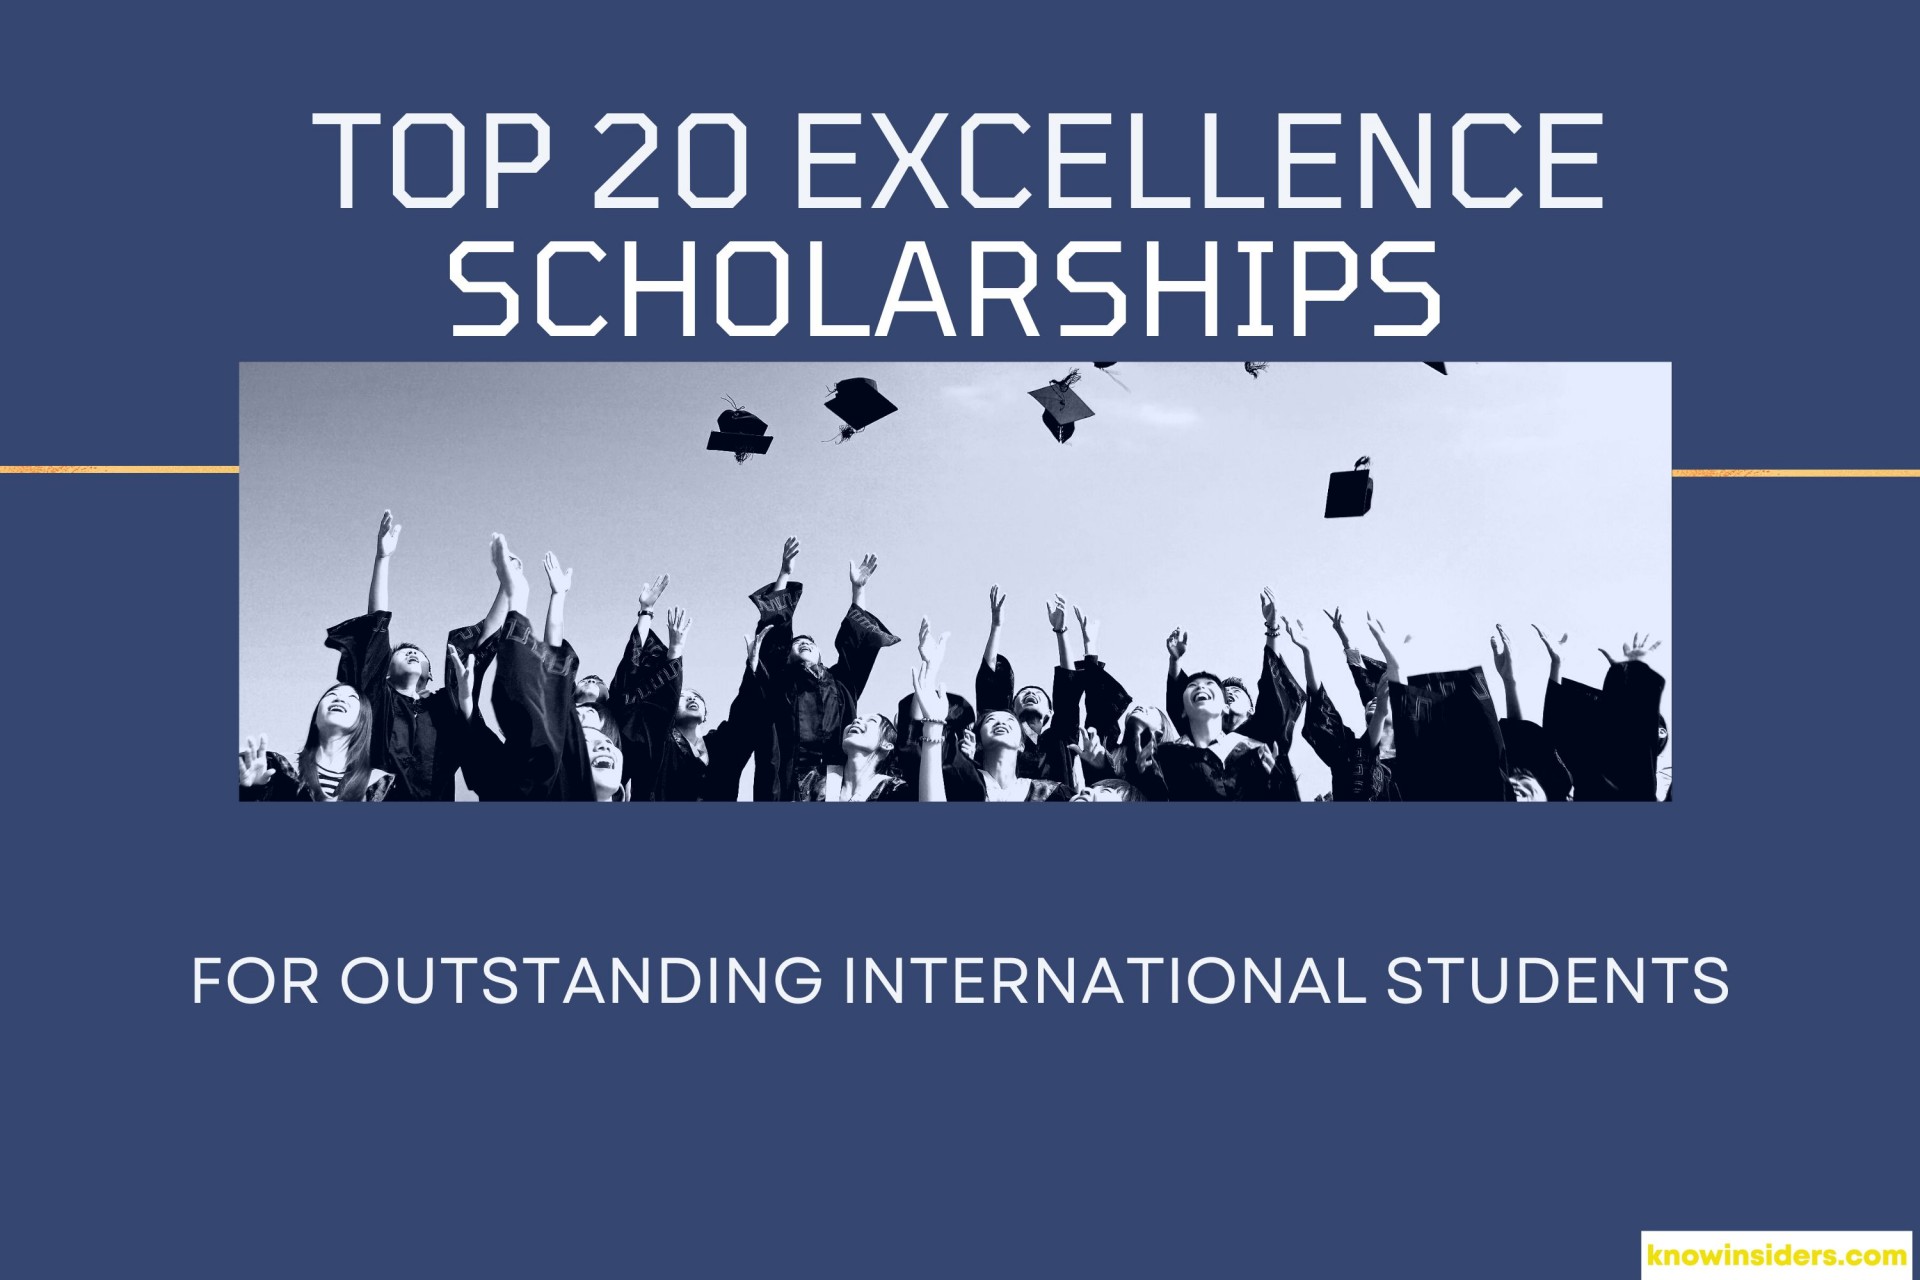 Top 20 Excellence Scholarships for Outstanding International Students